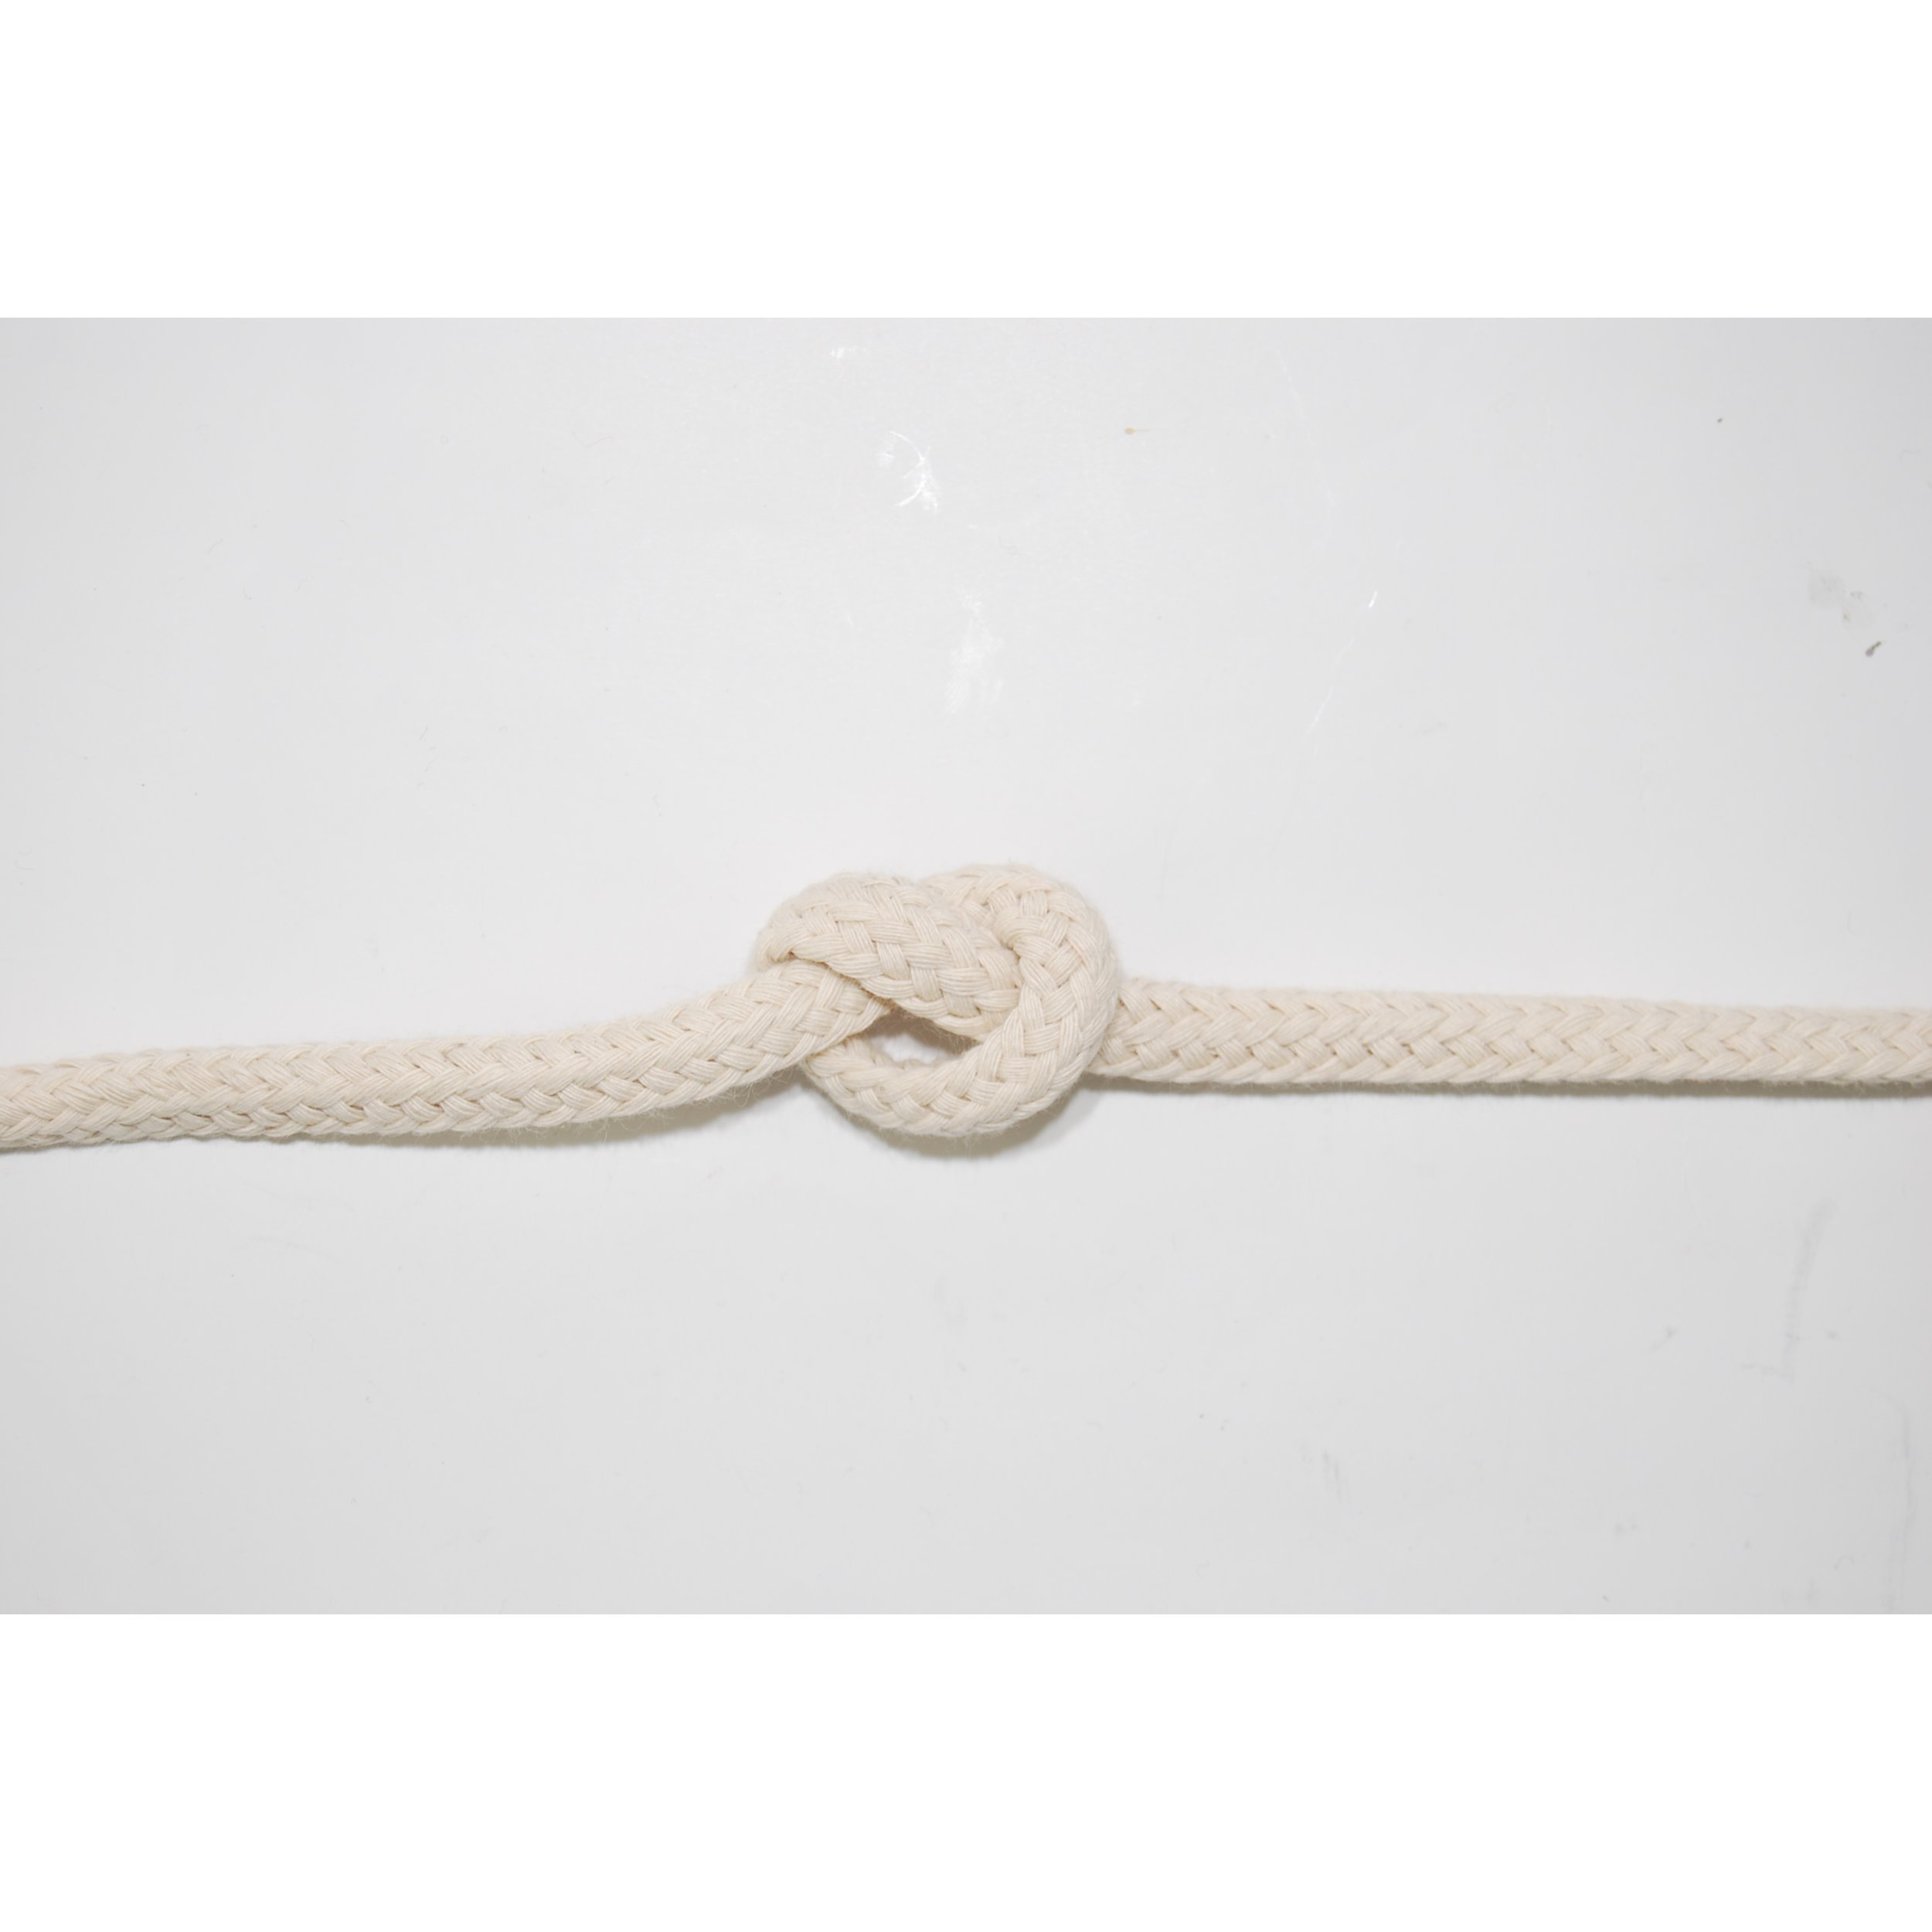 Cotton rope braided 8 mm hollow braid length 7.5 metres